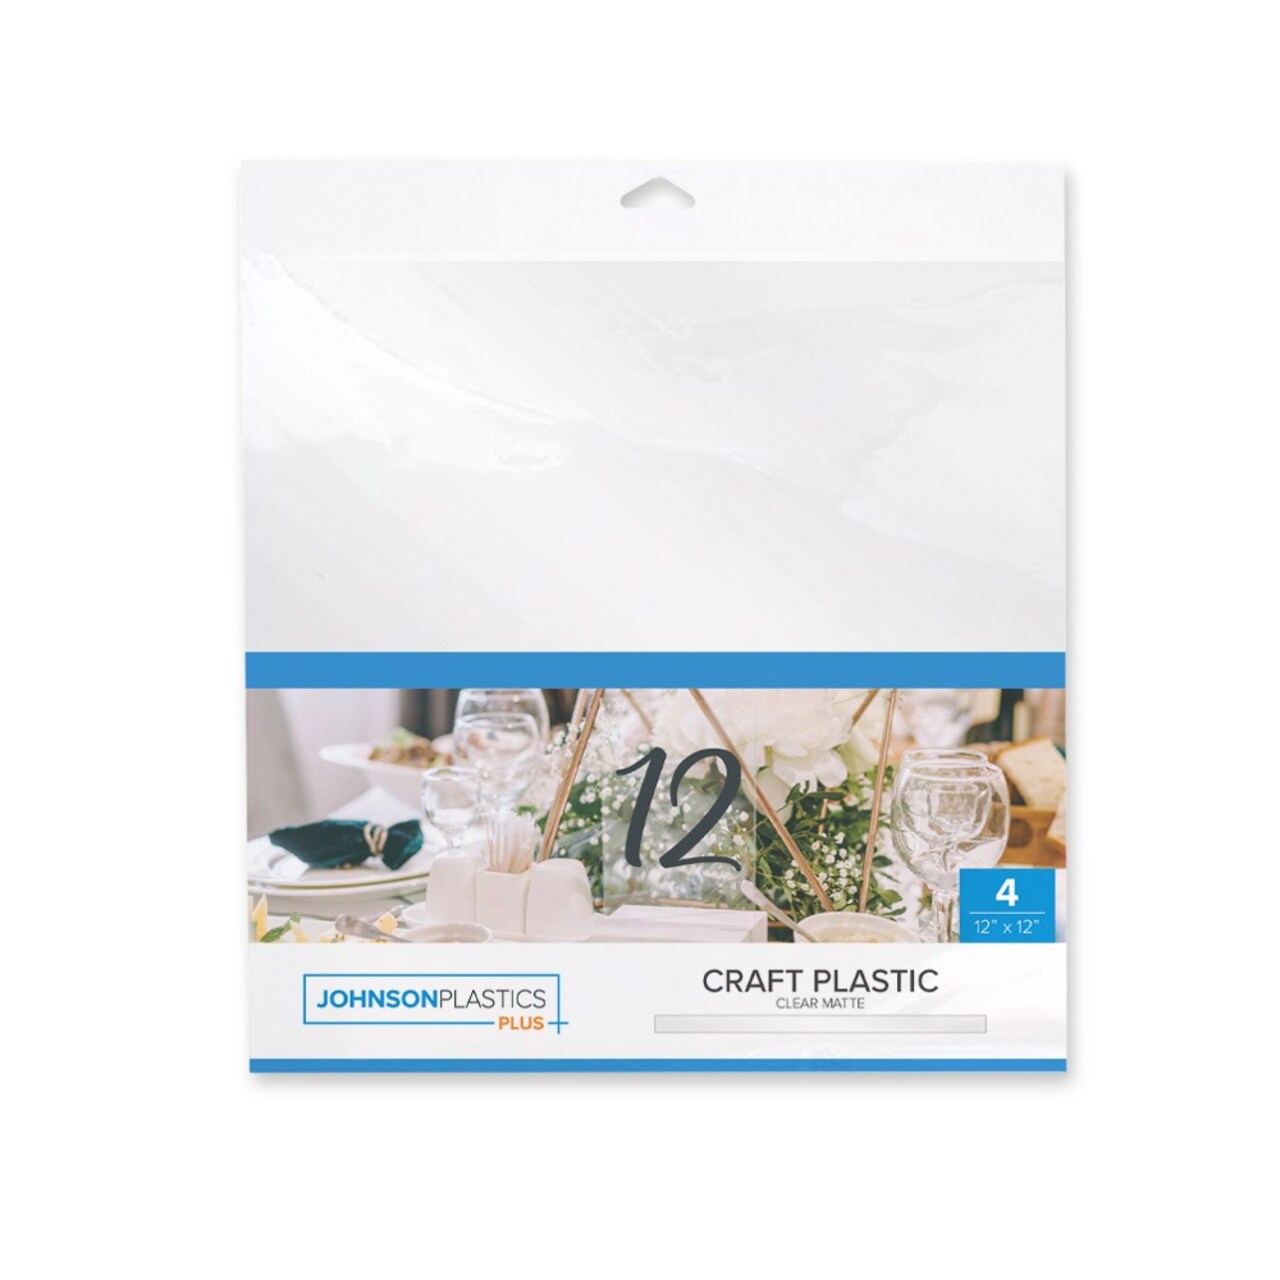 Craft Plastic Sheet Pack, Clear - 4 sheets per pack